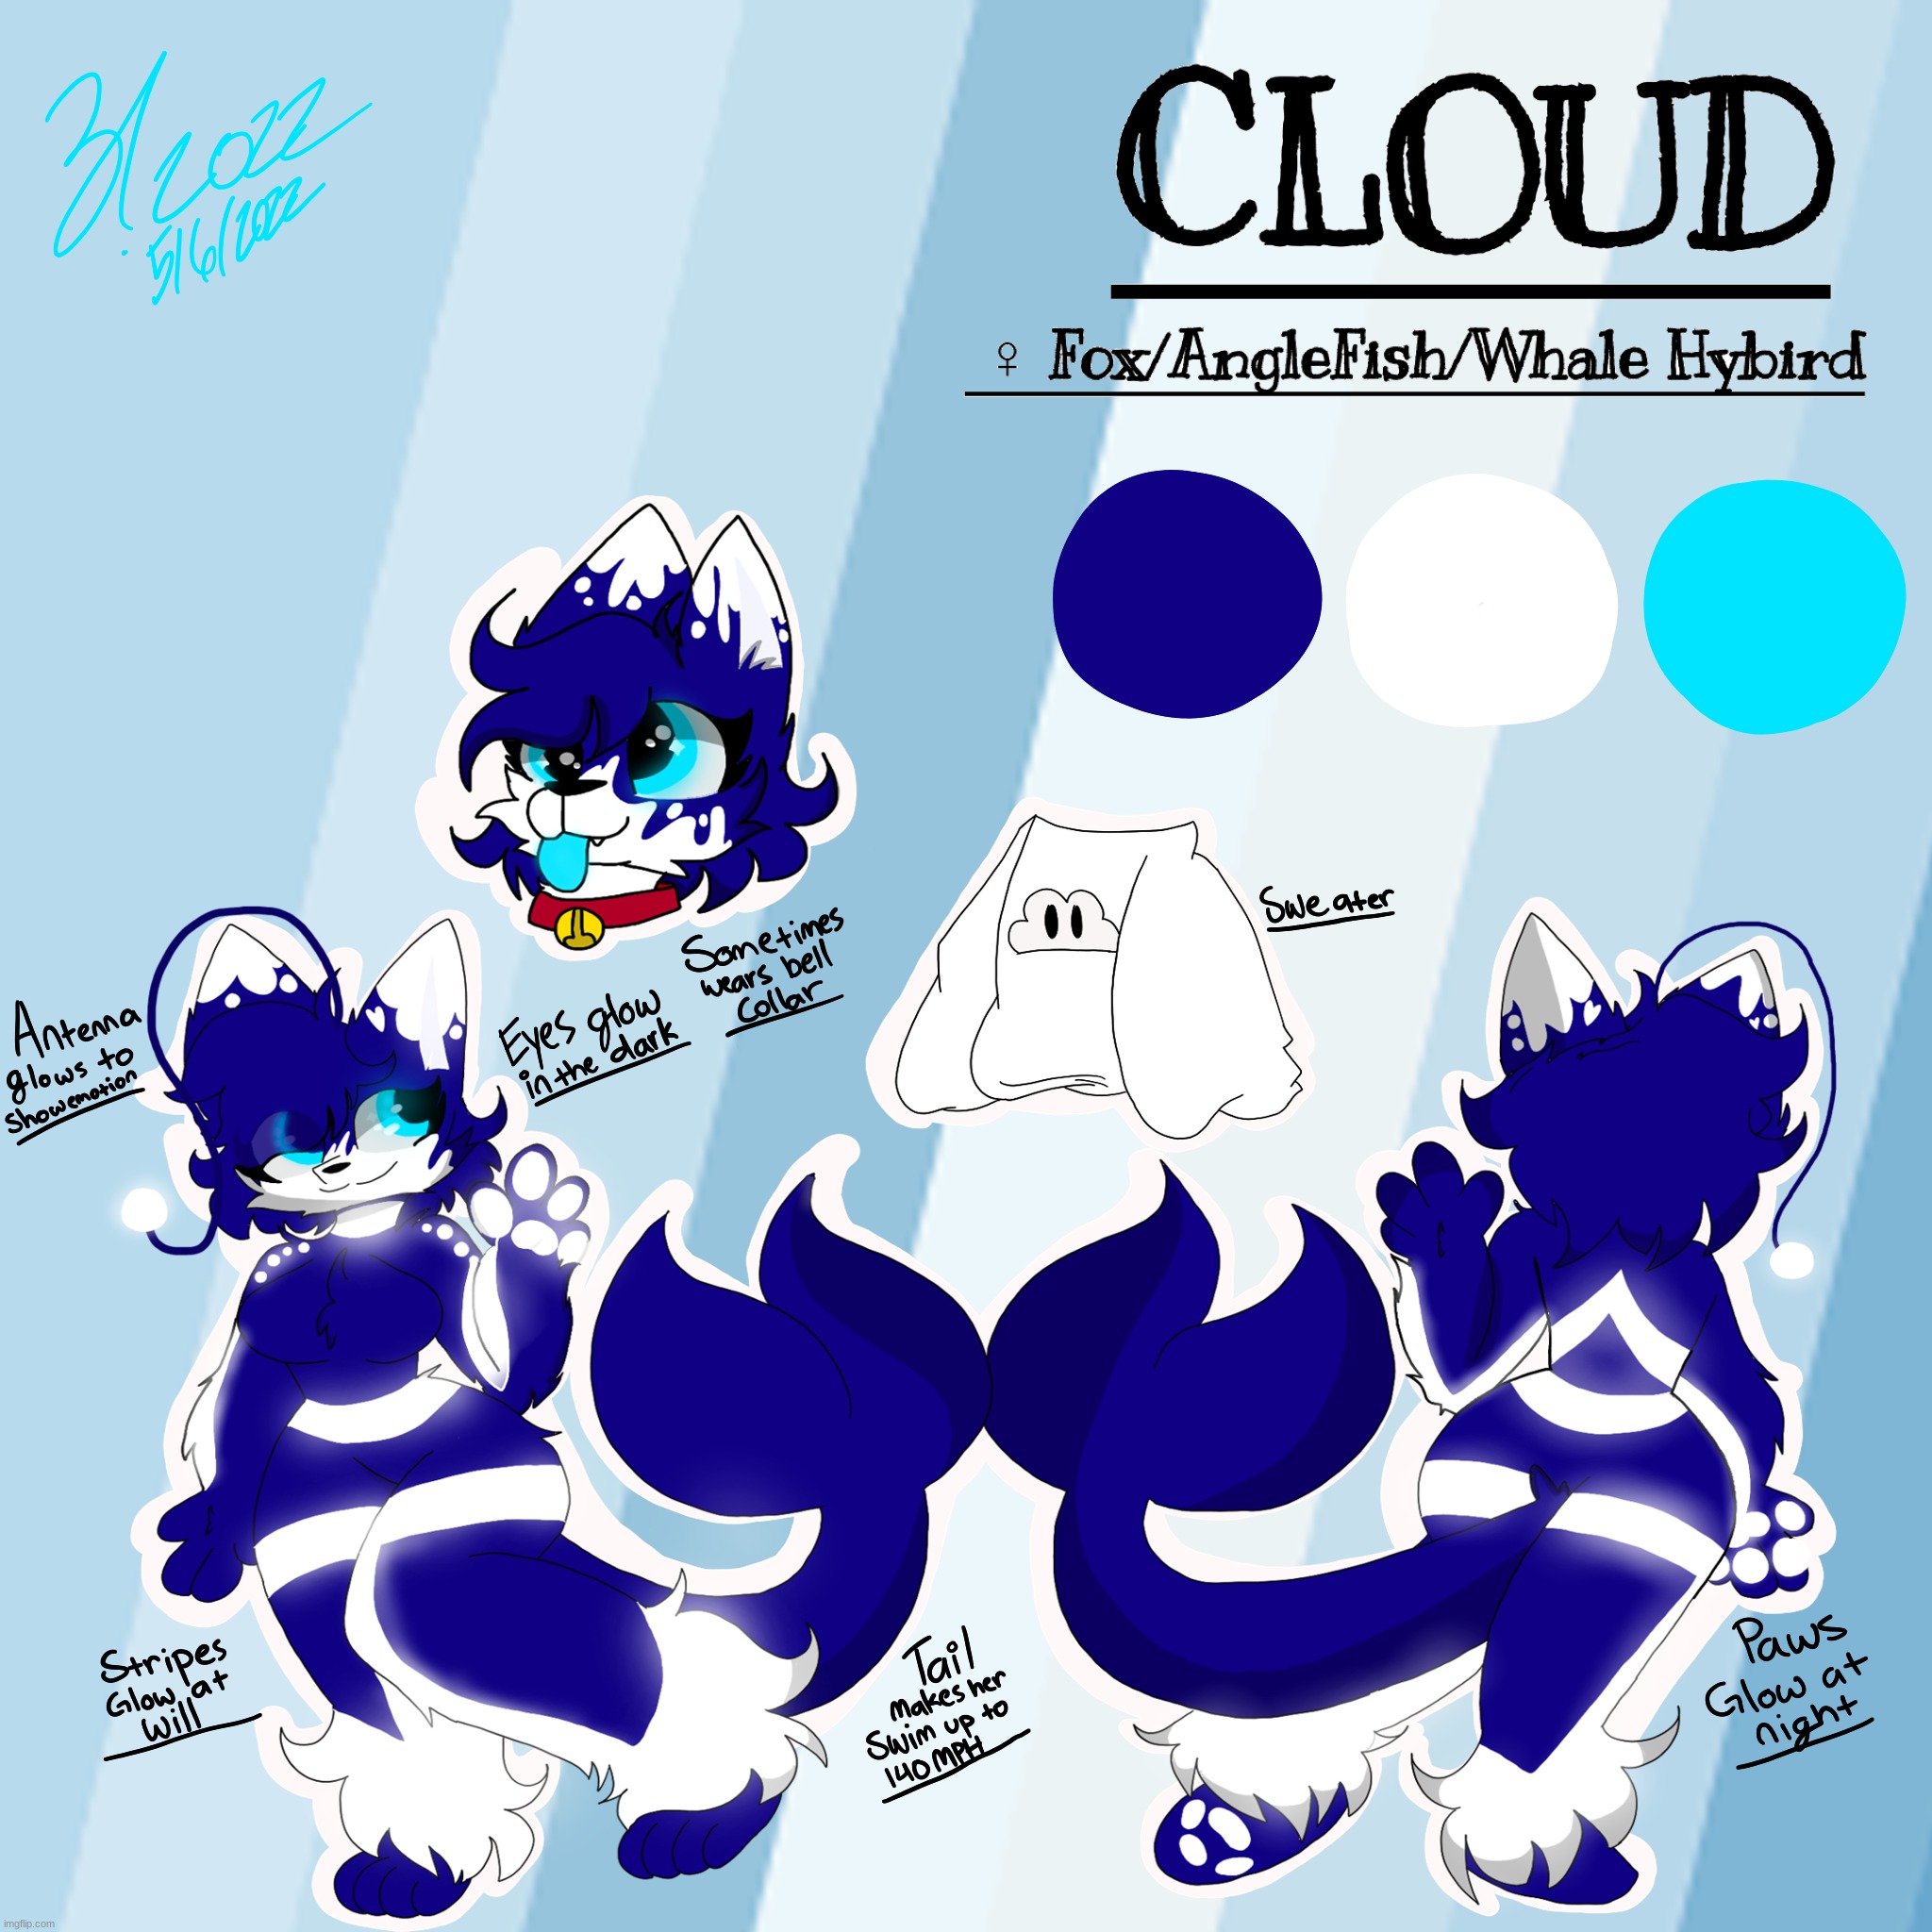 Finally finished Cloud's ref sheet-! | image tagged in cloud | made w/ Imgflip meme maker